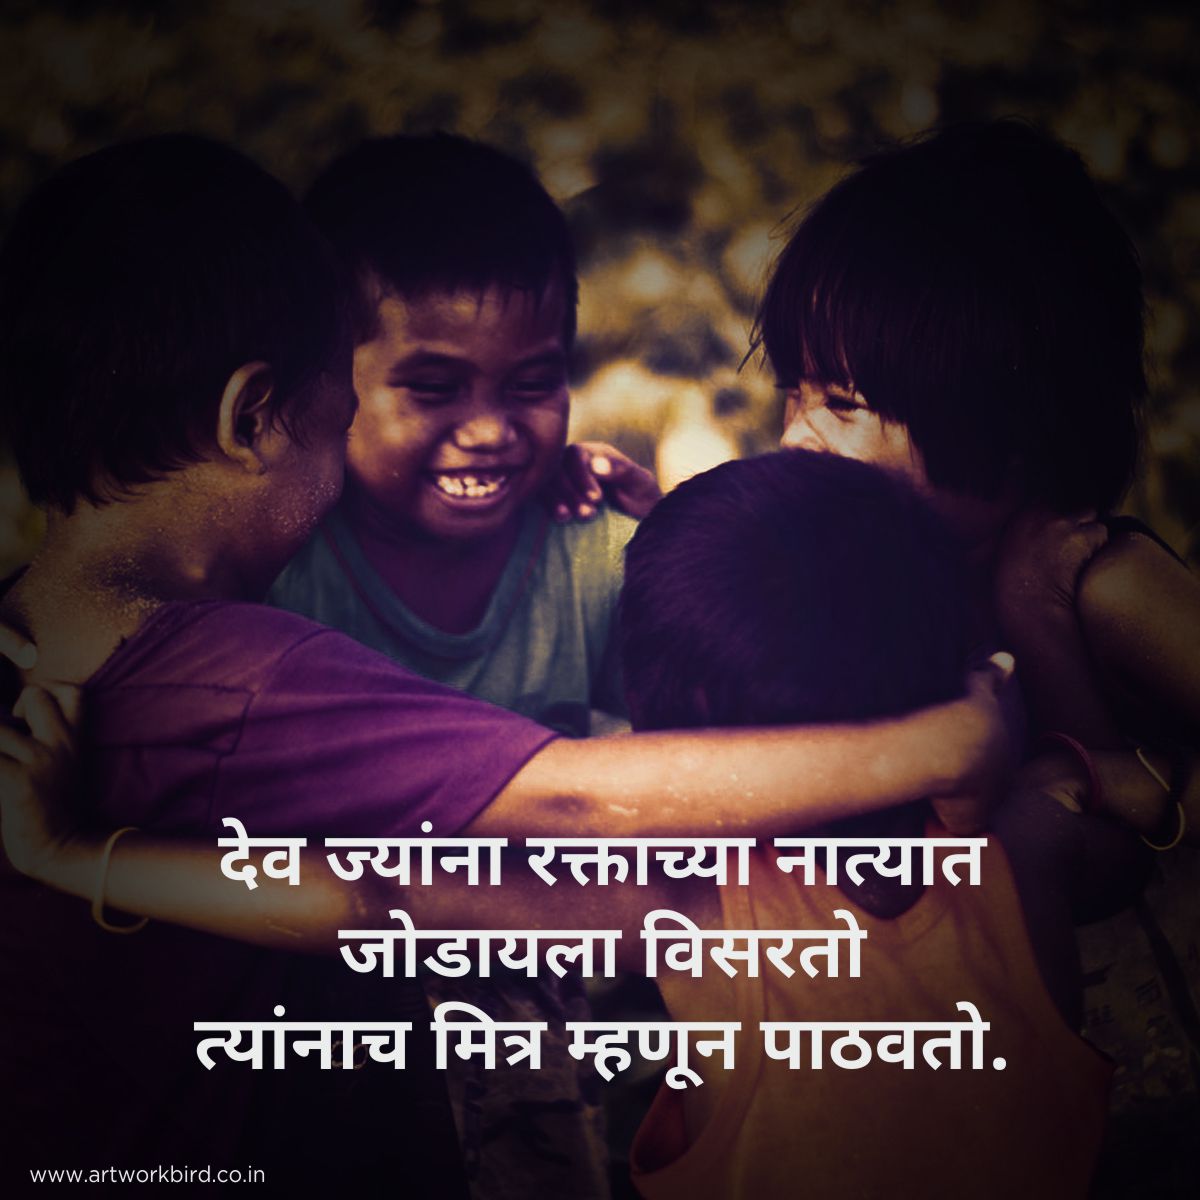 friendship quotes in marathi with images